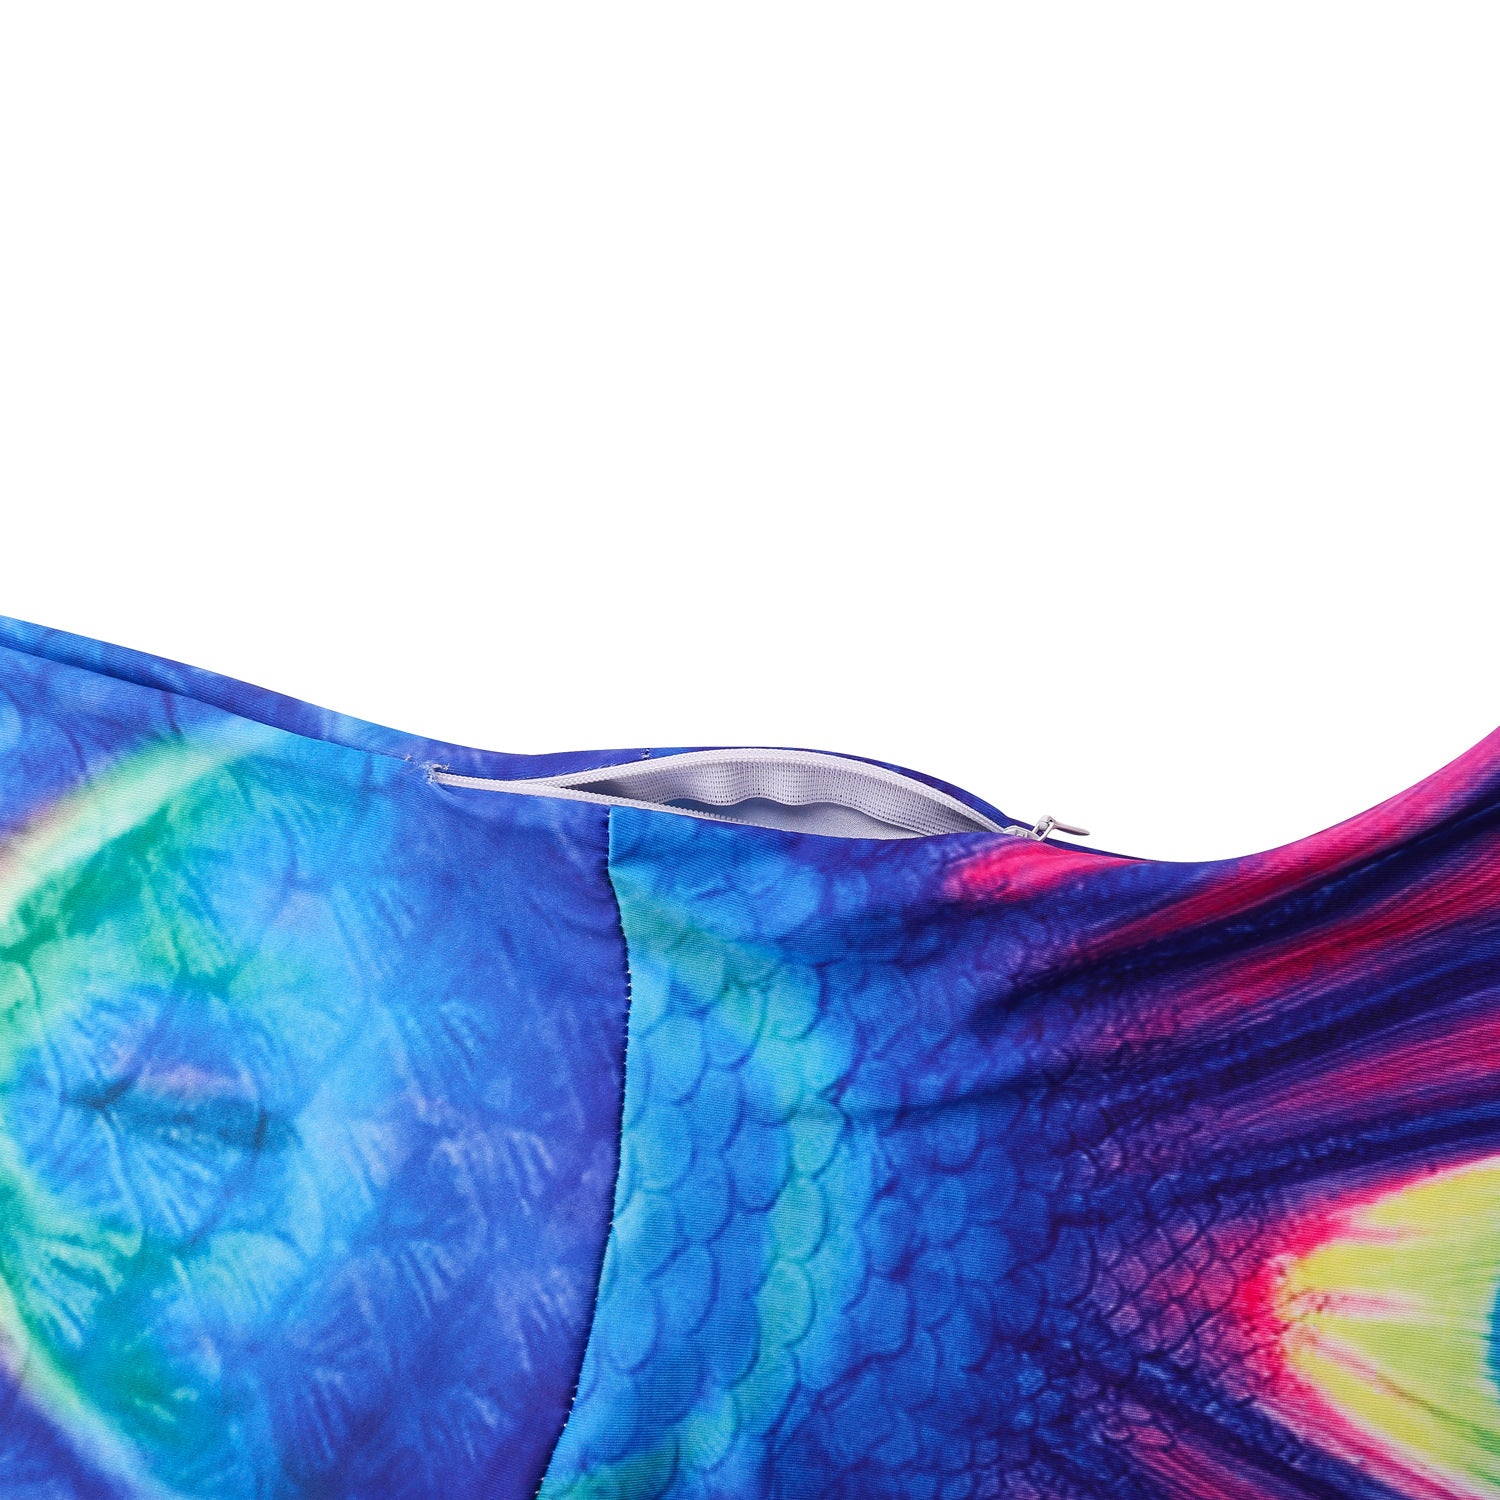 Side zip close up from the Luxury Peacock Purple & Blue Mermaid Tail. Mini Mermaid Tails